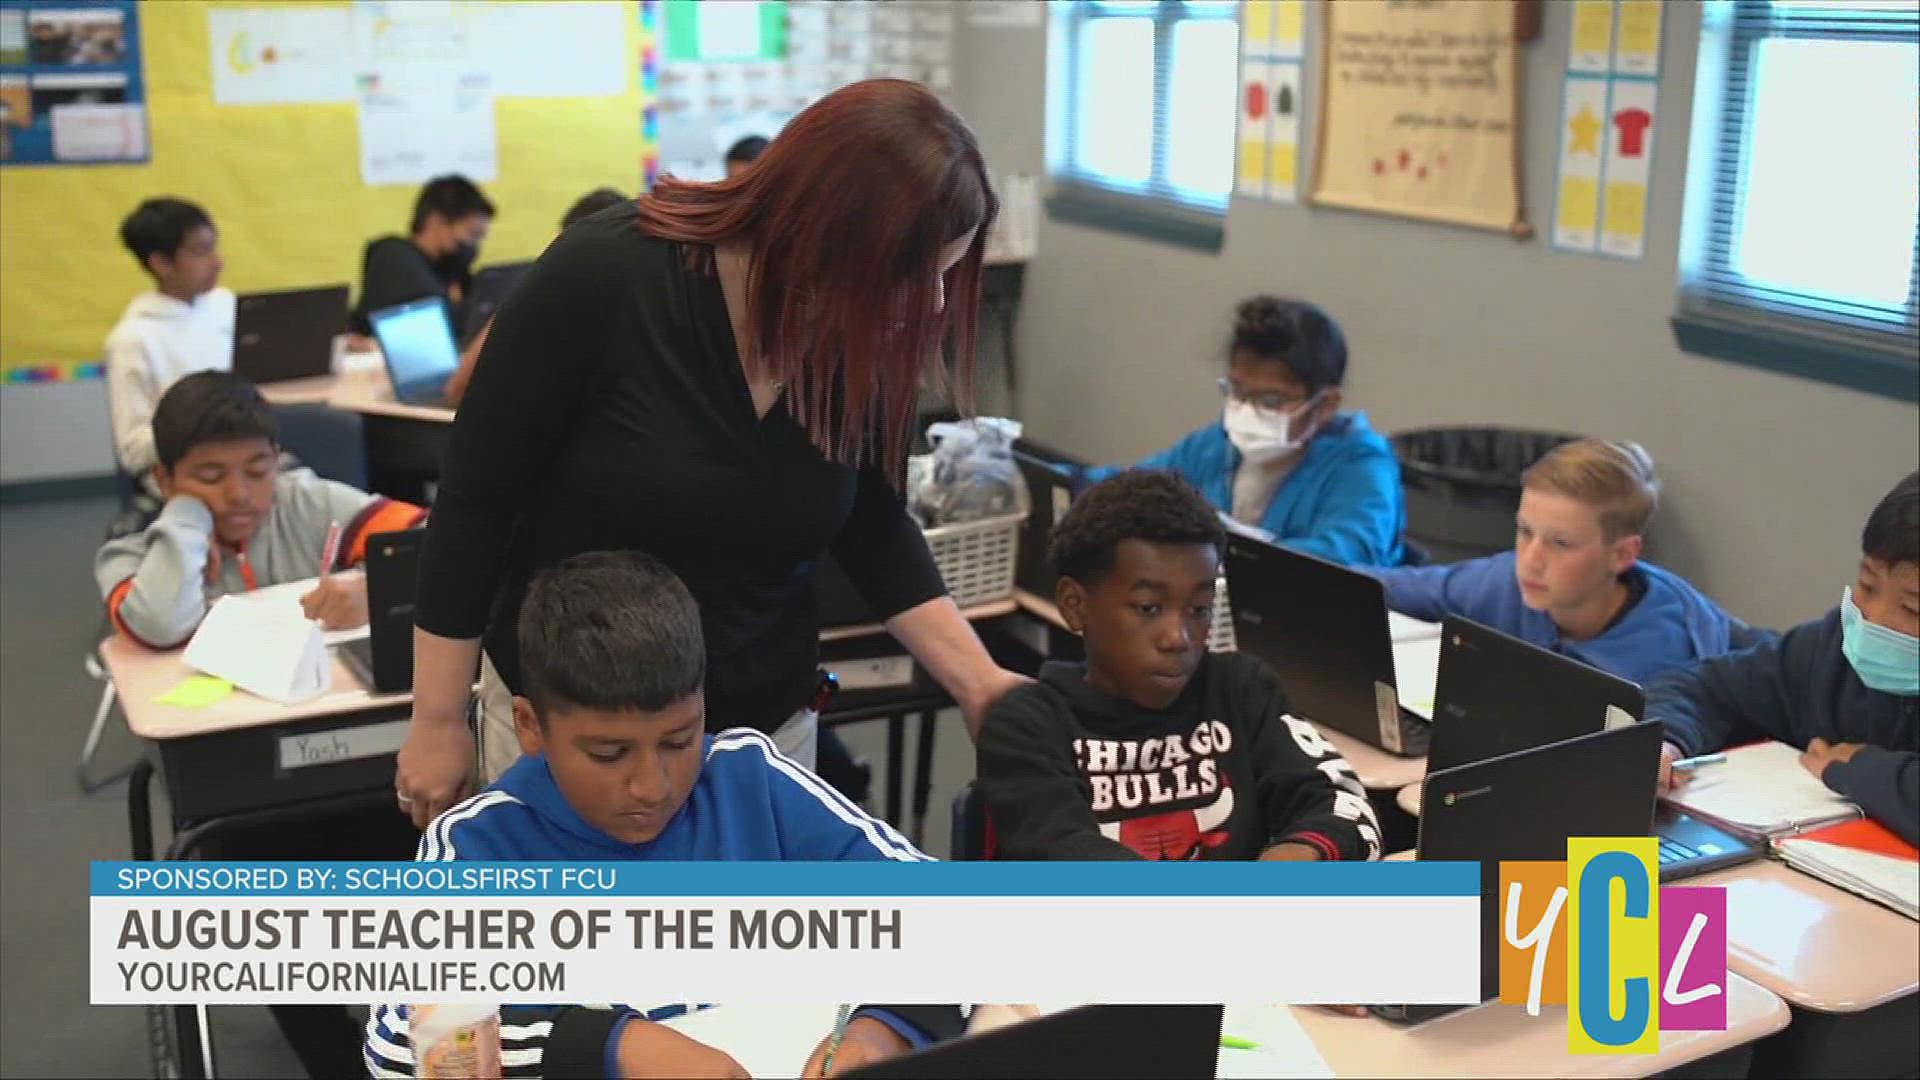 Anita Guzman-Turner at Robert J. Fite Elementary in Elk Grove is being recognized as ABC10's Teacher of the Month!